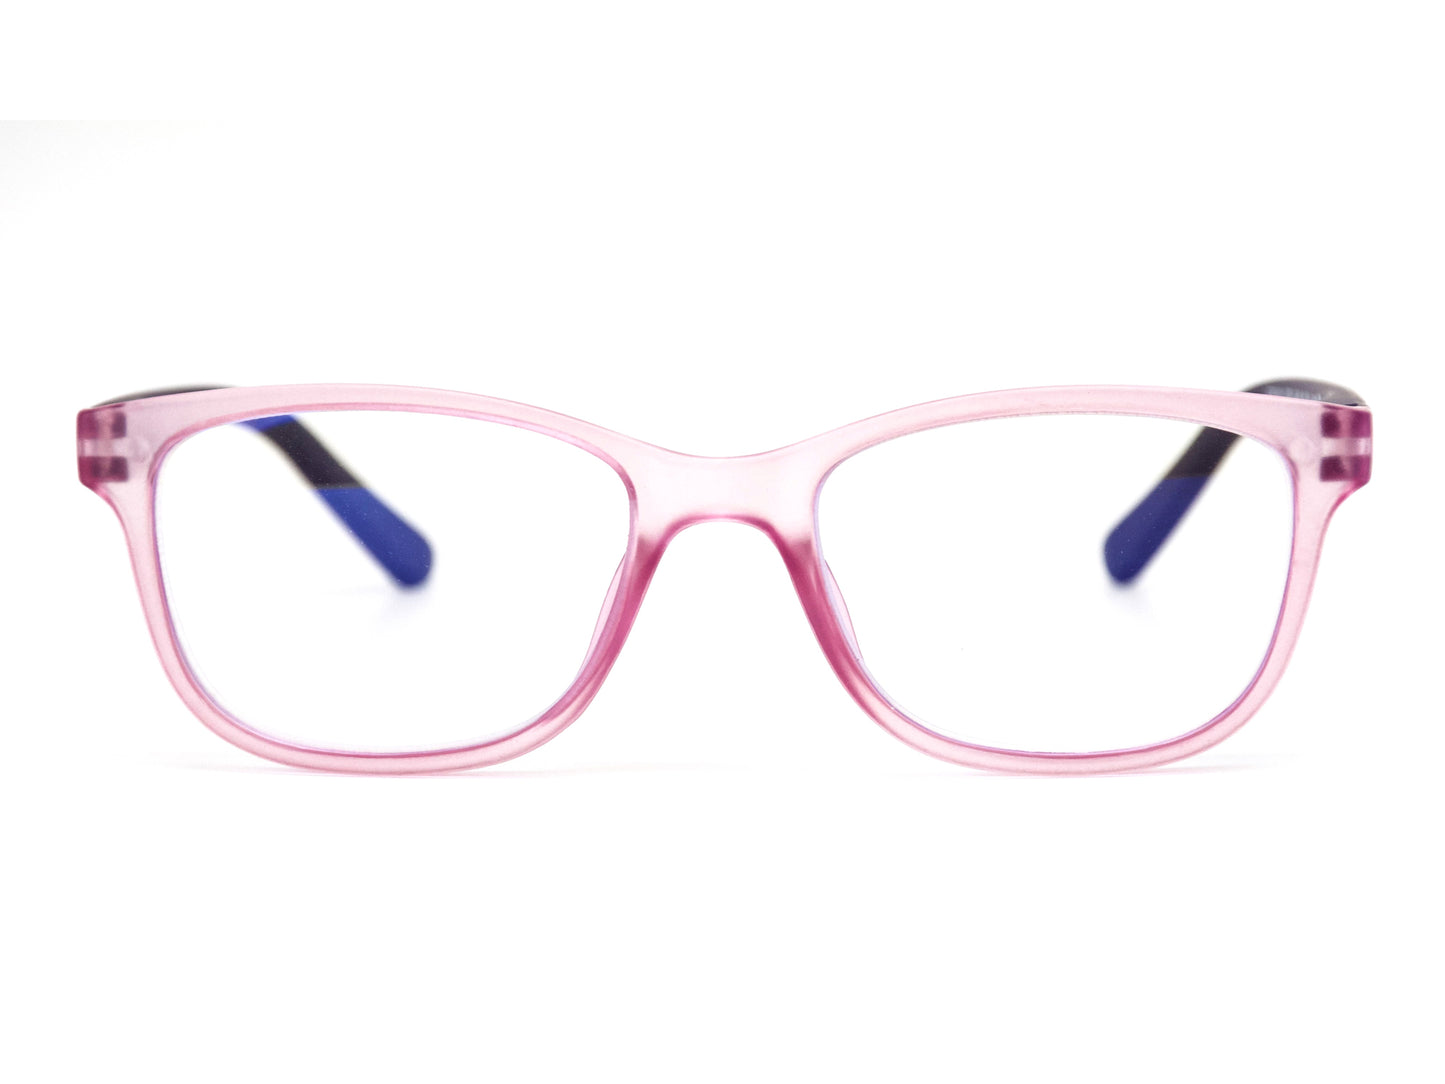 Sydney kids pink cute protective blue light blocking girl's glasses and frames.